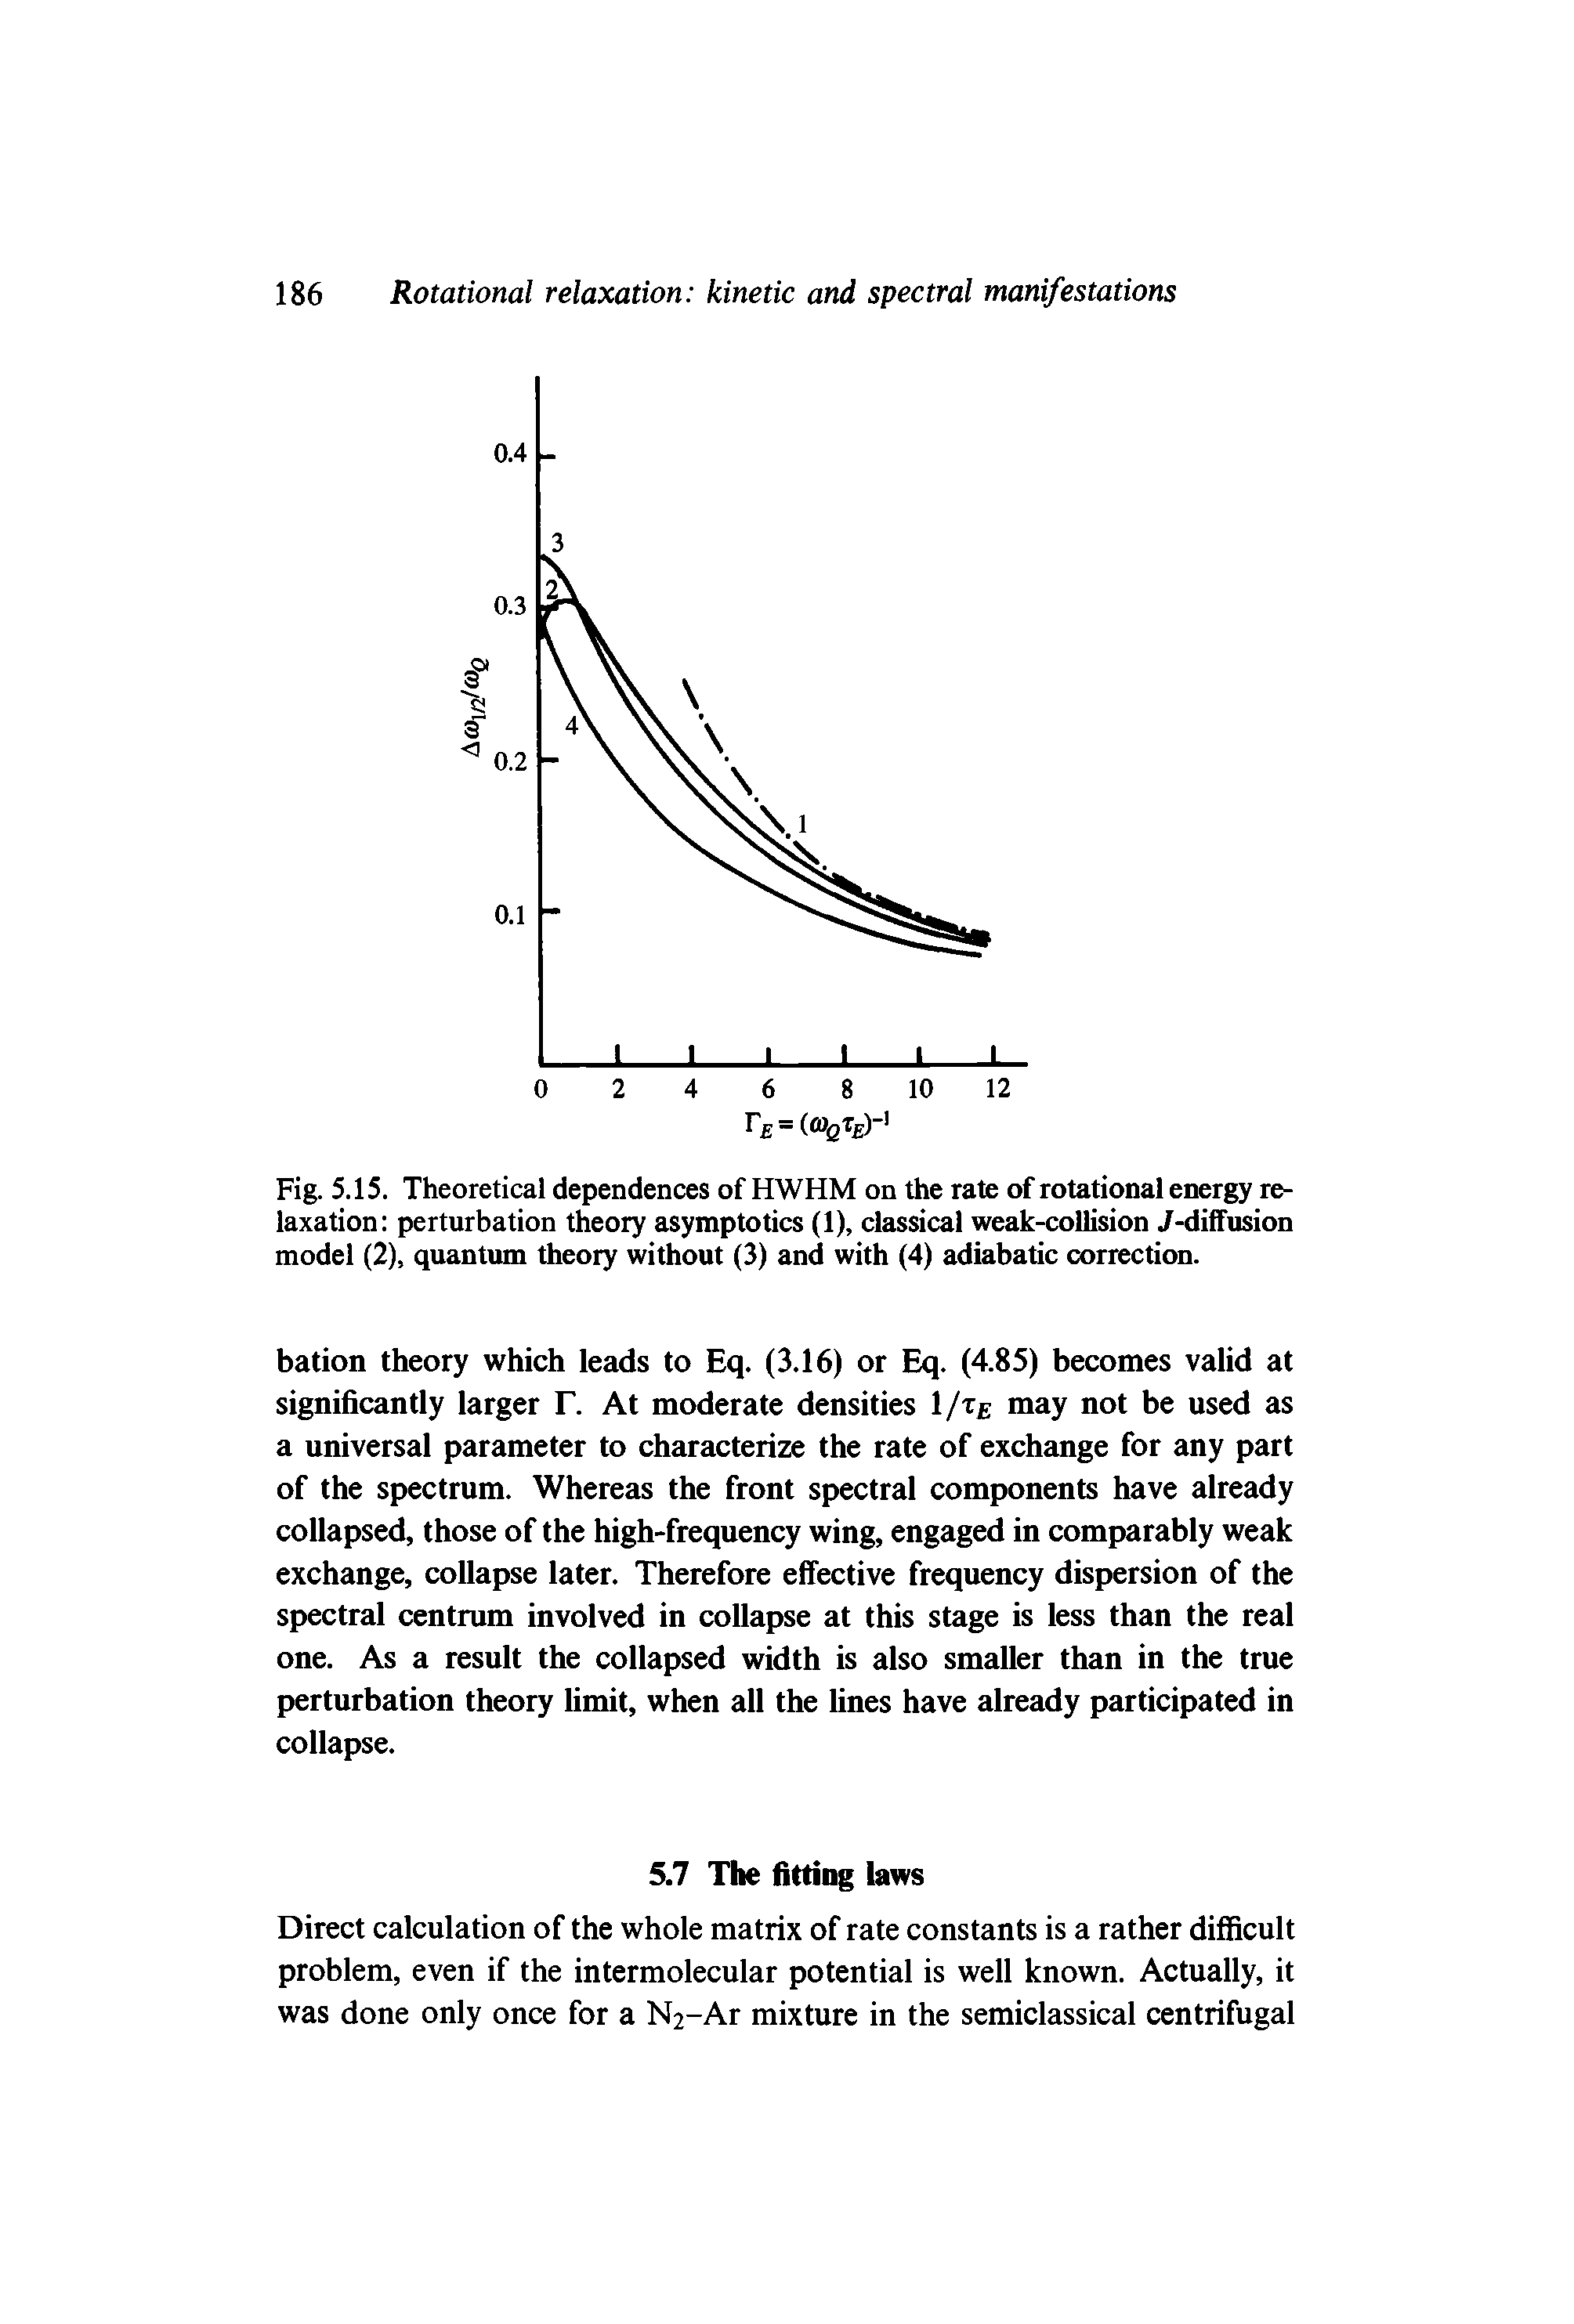 Fig. 5.15. Theoretical dependences of HWHM on the rate of rotational energy relaxation perturbation theory asymptotics (1), classical weak-collision. /-diffusion model (2), quantum theory without (3) and with (4) adiabatic correction.